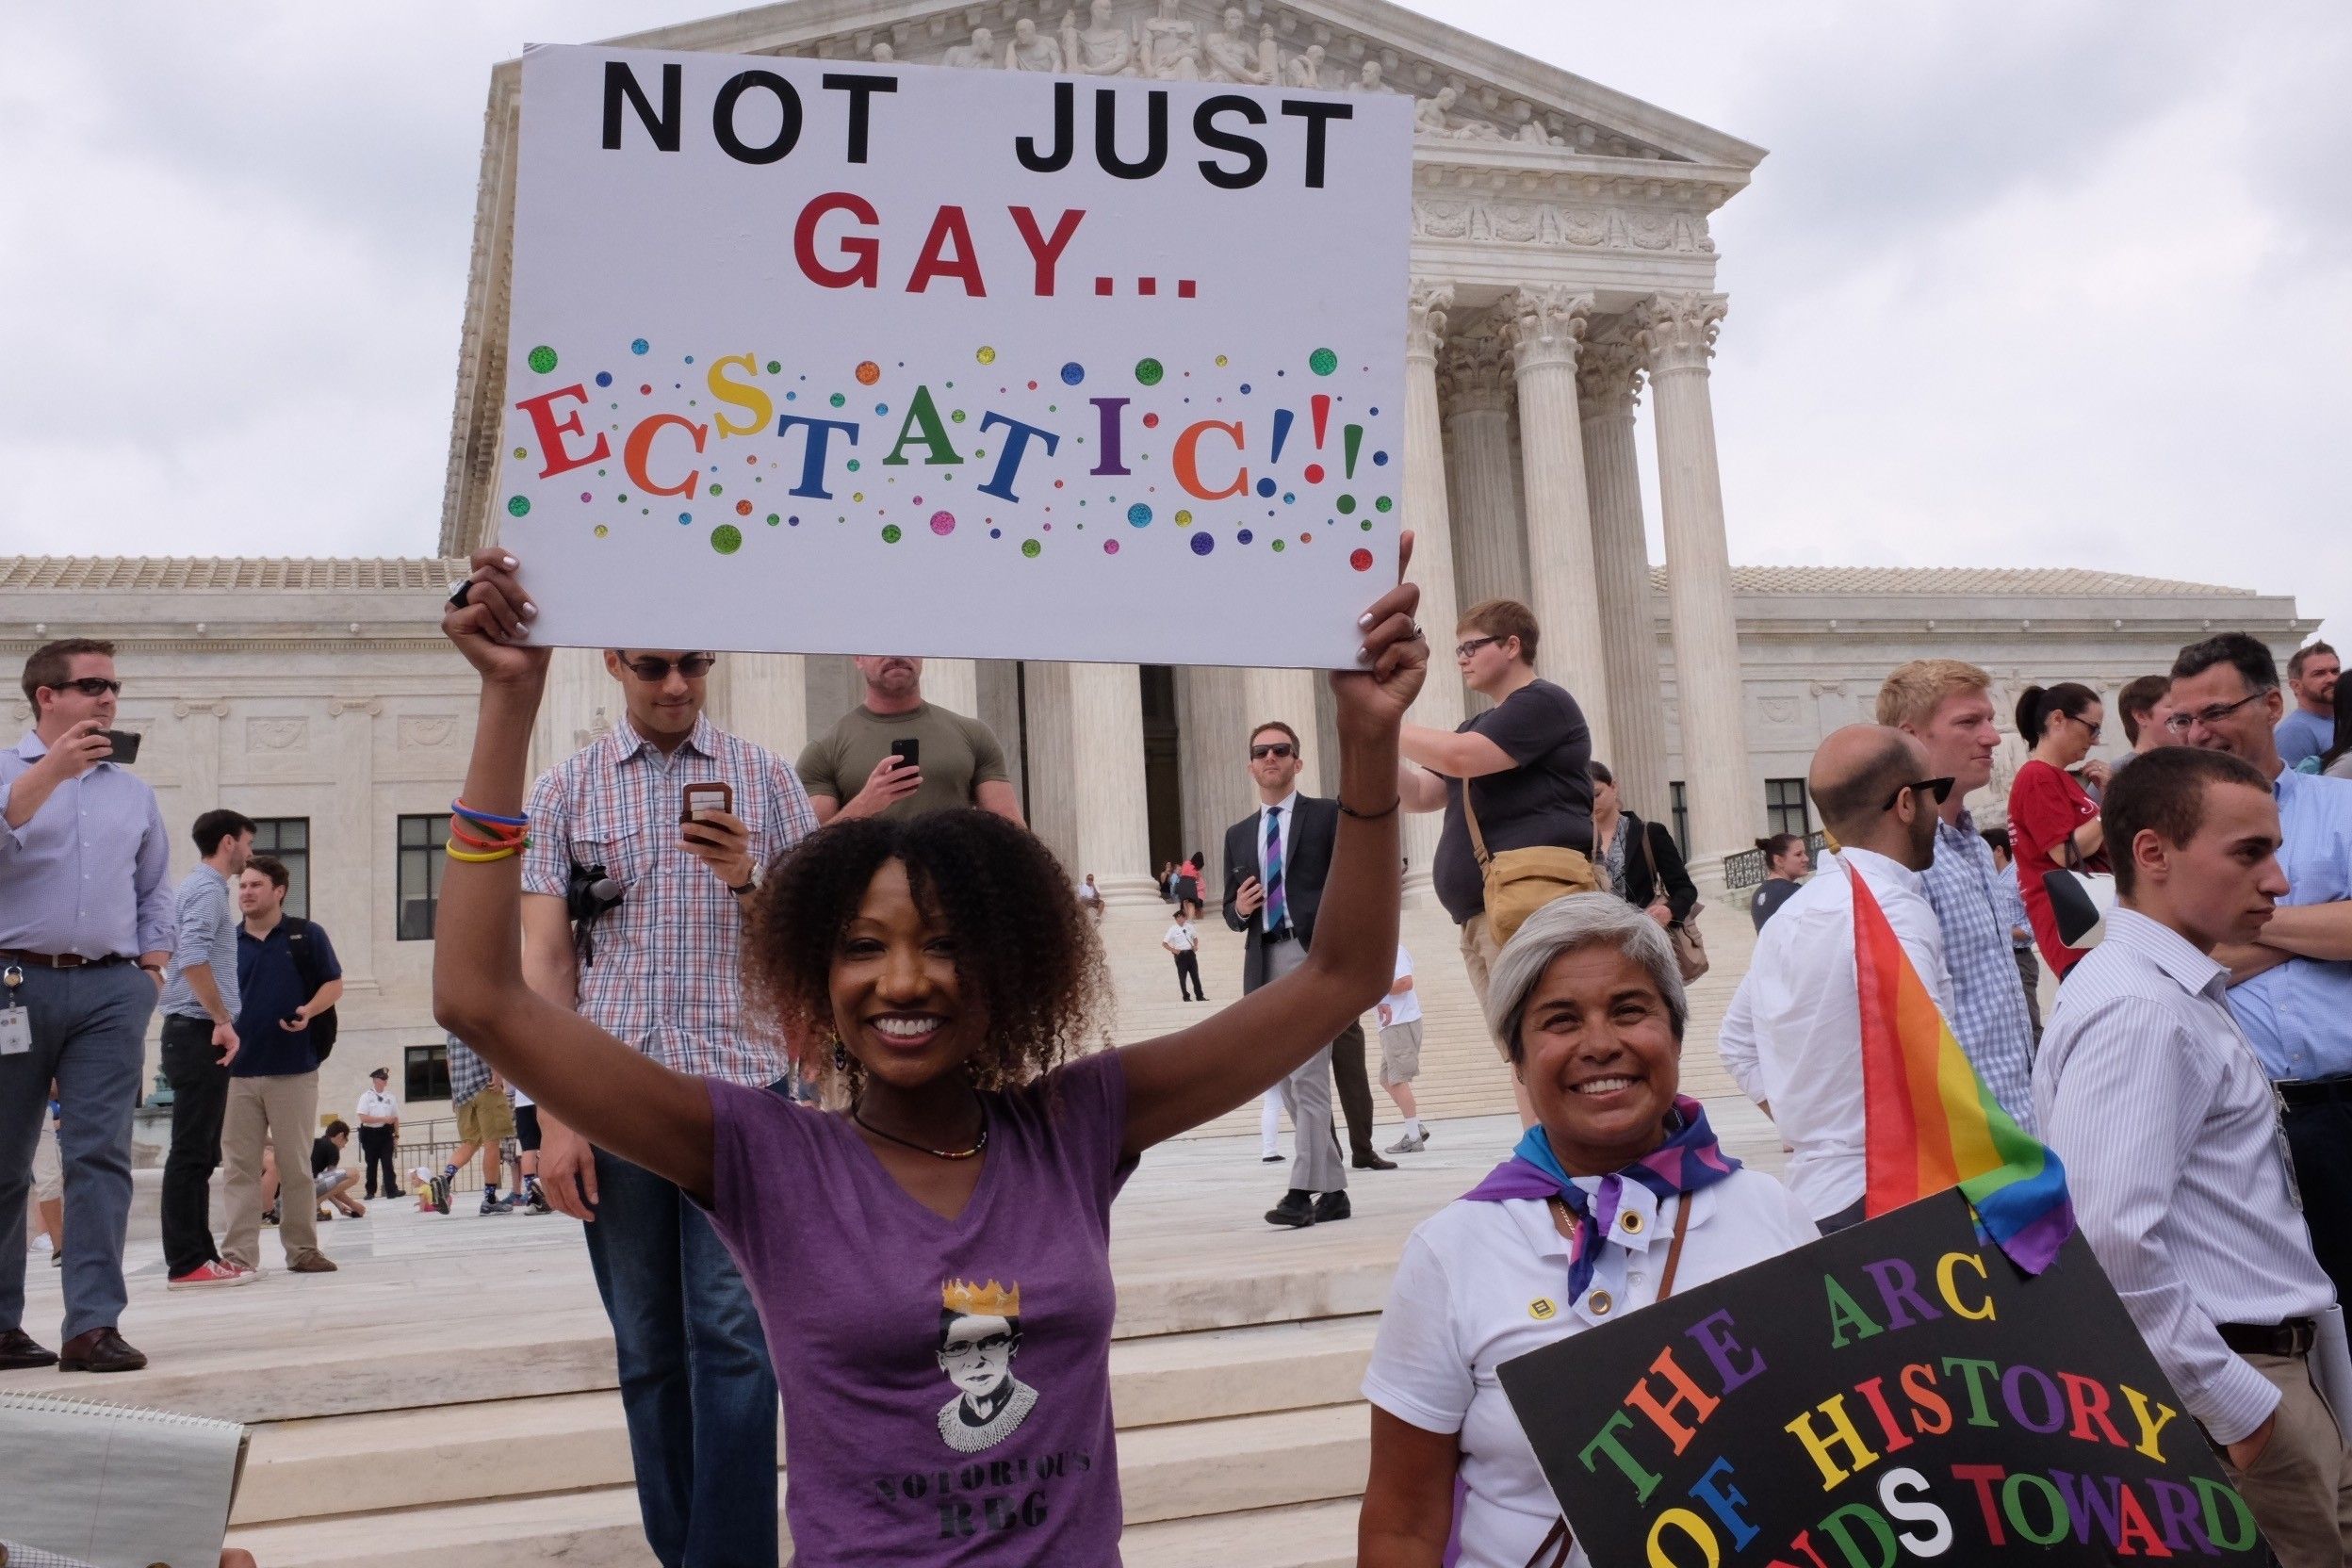 undreds gather outside of the Supreme Court on Friday to celebrate the decision to legalize gay marriage in all 50 states, in Washington, on June 26, 2015